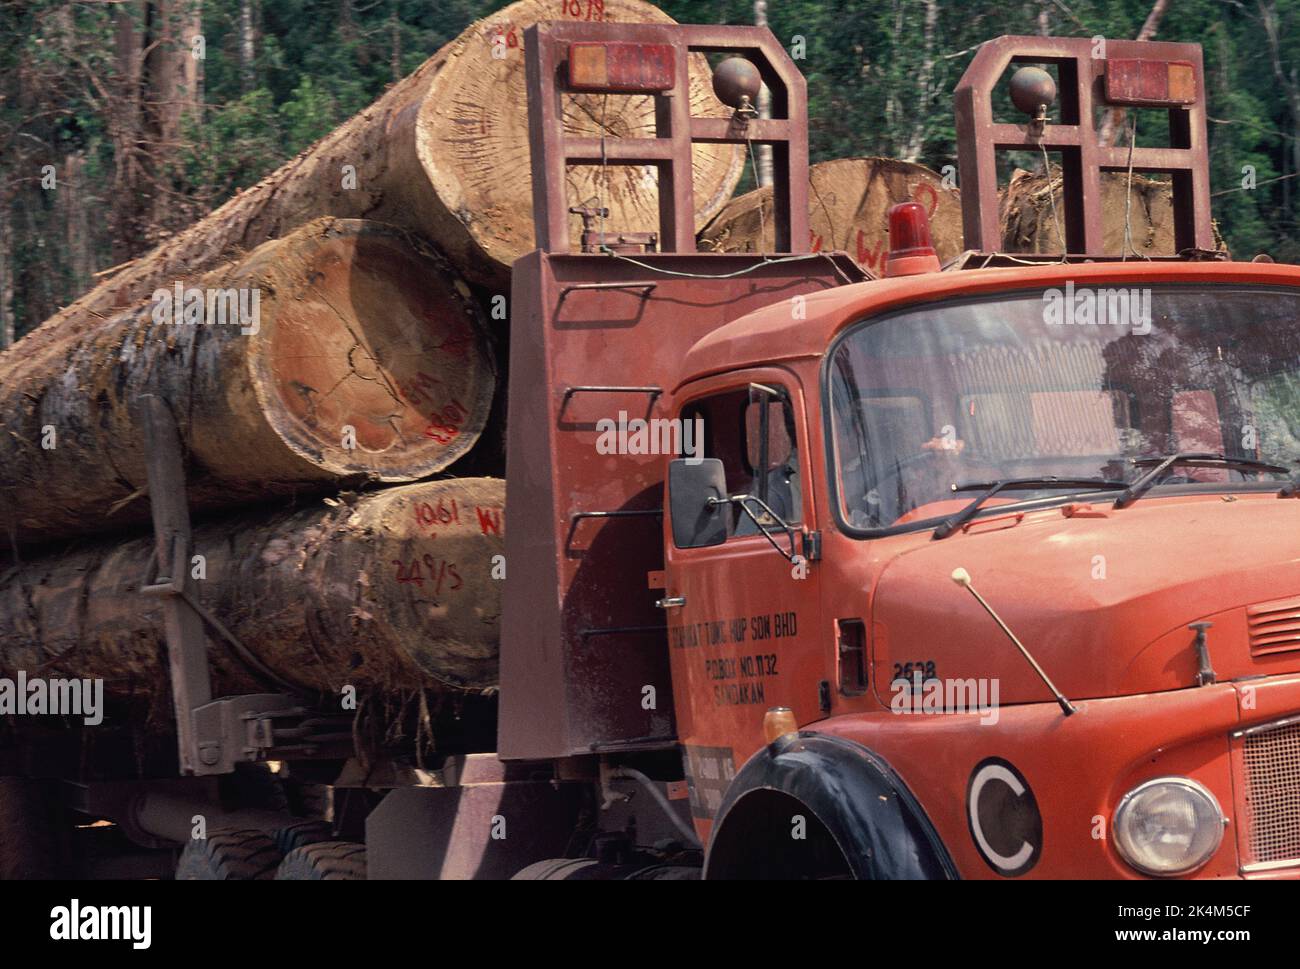 Malaysia. Sabah. Close up of logging truck loaded with hardwood logs. Stock Photo